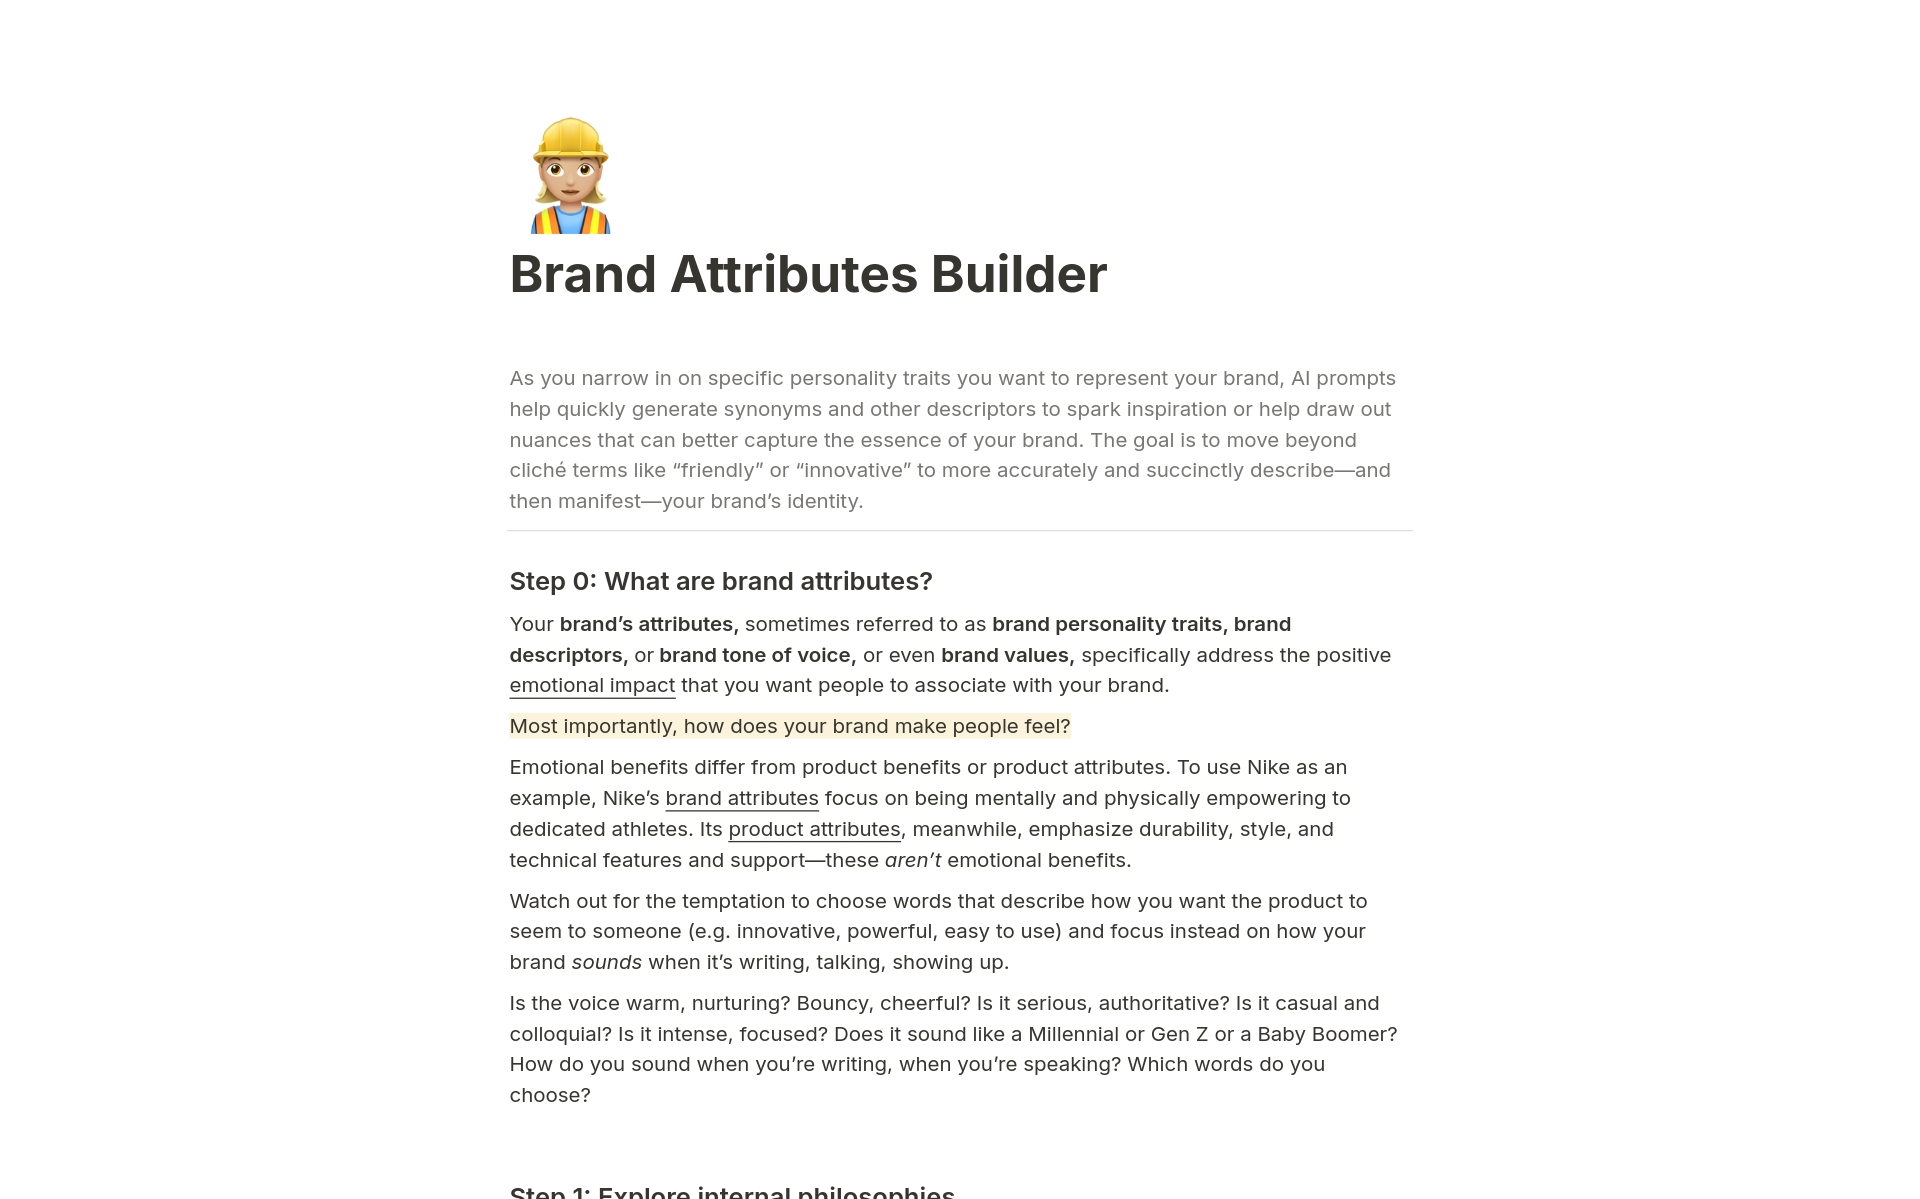 Your brand attributes are a major part of your brand identity and a key input to brand guidelines. This template helps you craft your brand attributes or personality traits to inform brand guidelines, voice and tone, and messaging.